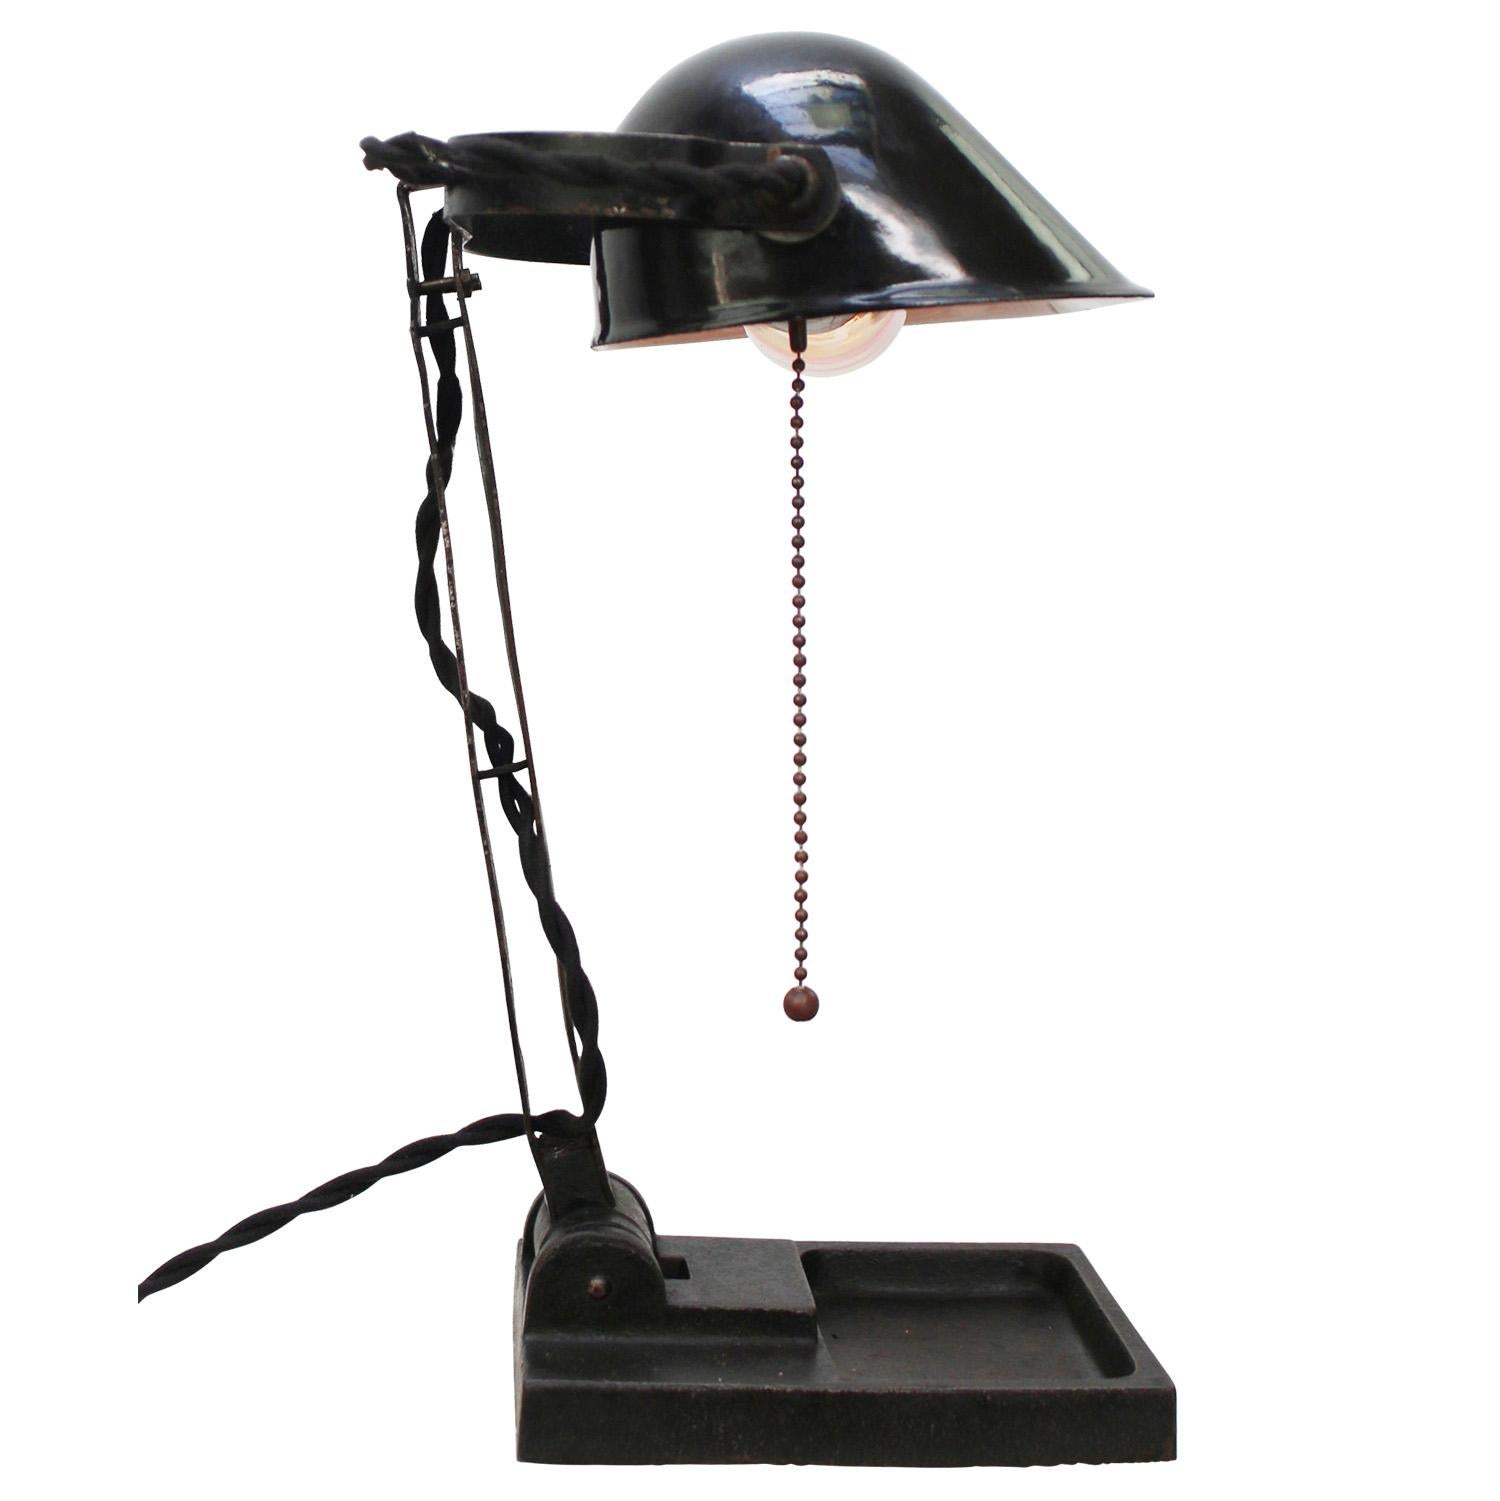 Hungarian black enamel desk light
2.5 meter black cotton flex, plug and pul switch

Also available with US/UK plug

Weight: 2.10 kg / 4.6 lb

Priced per individual item. All lamps have been made suitable by international standards for incandescent